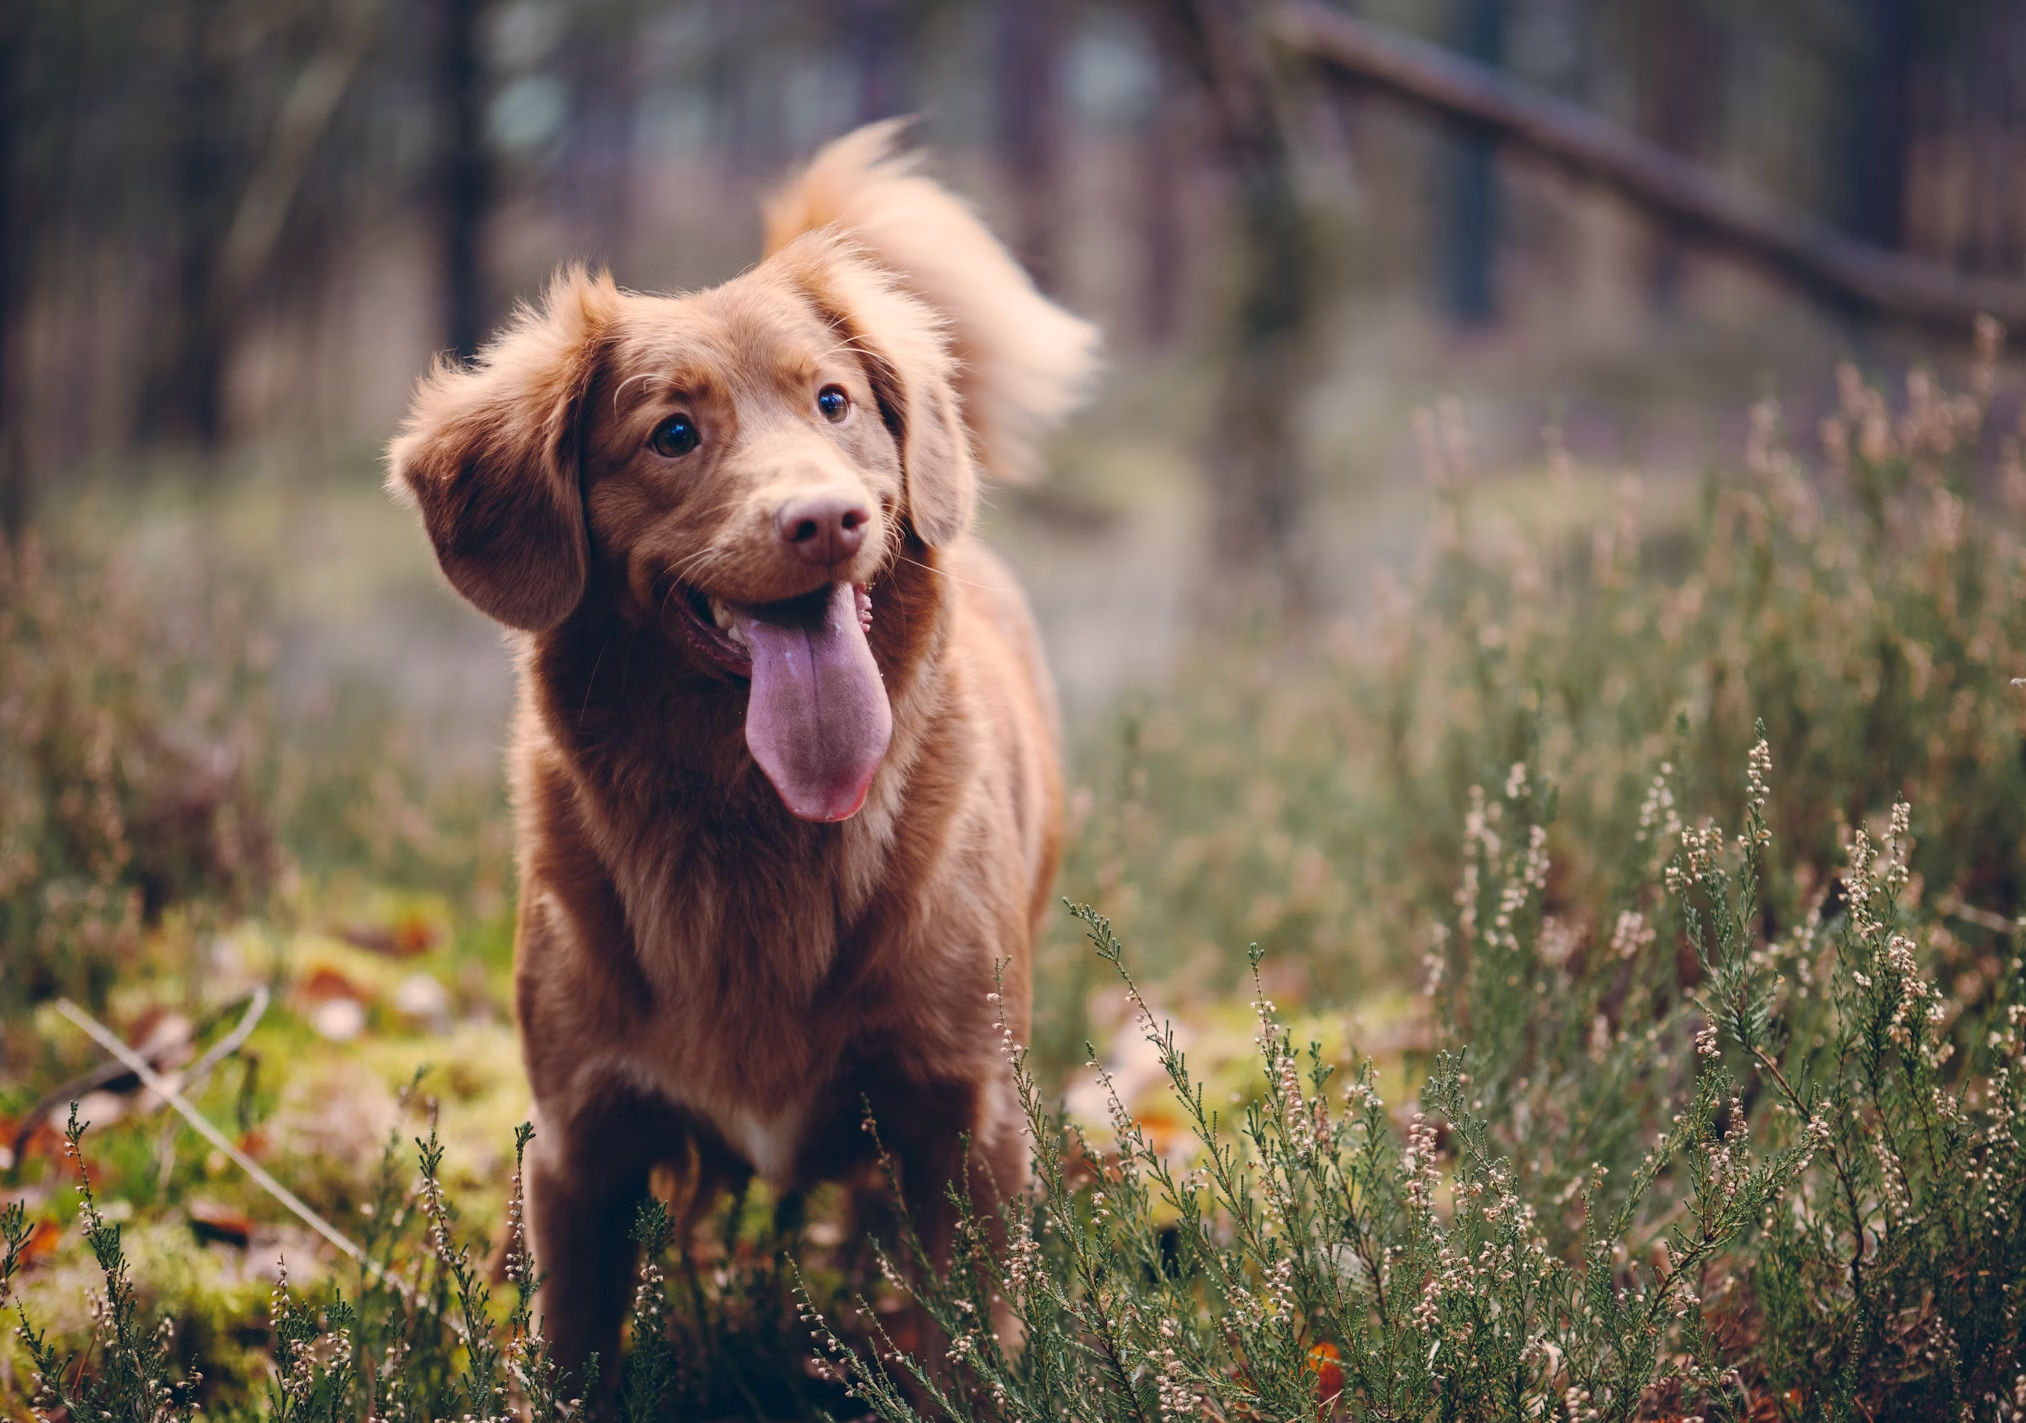 How Exercising With Your Dog Improves Your Mental Health